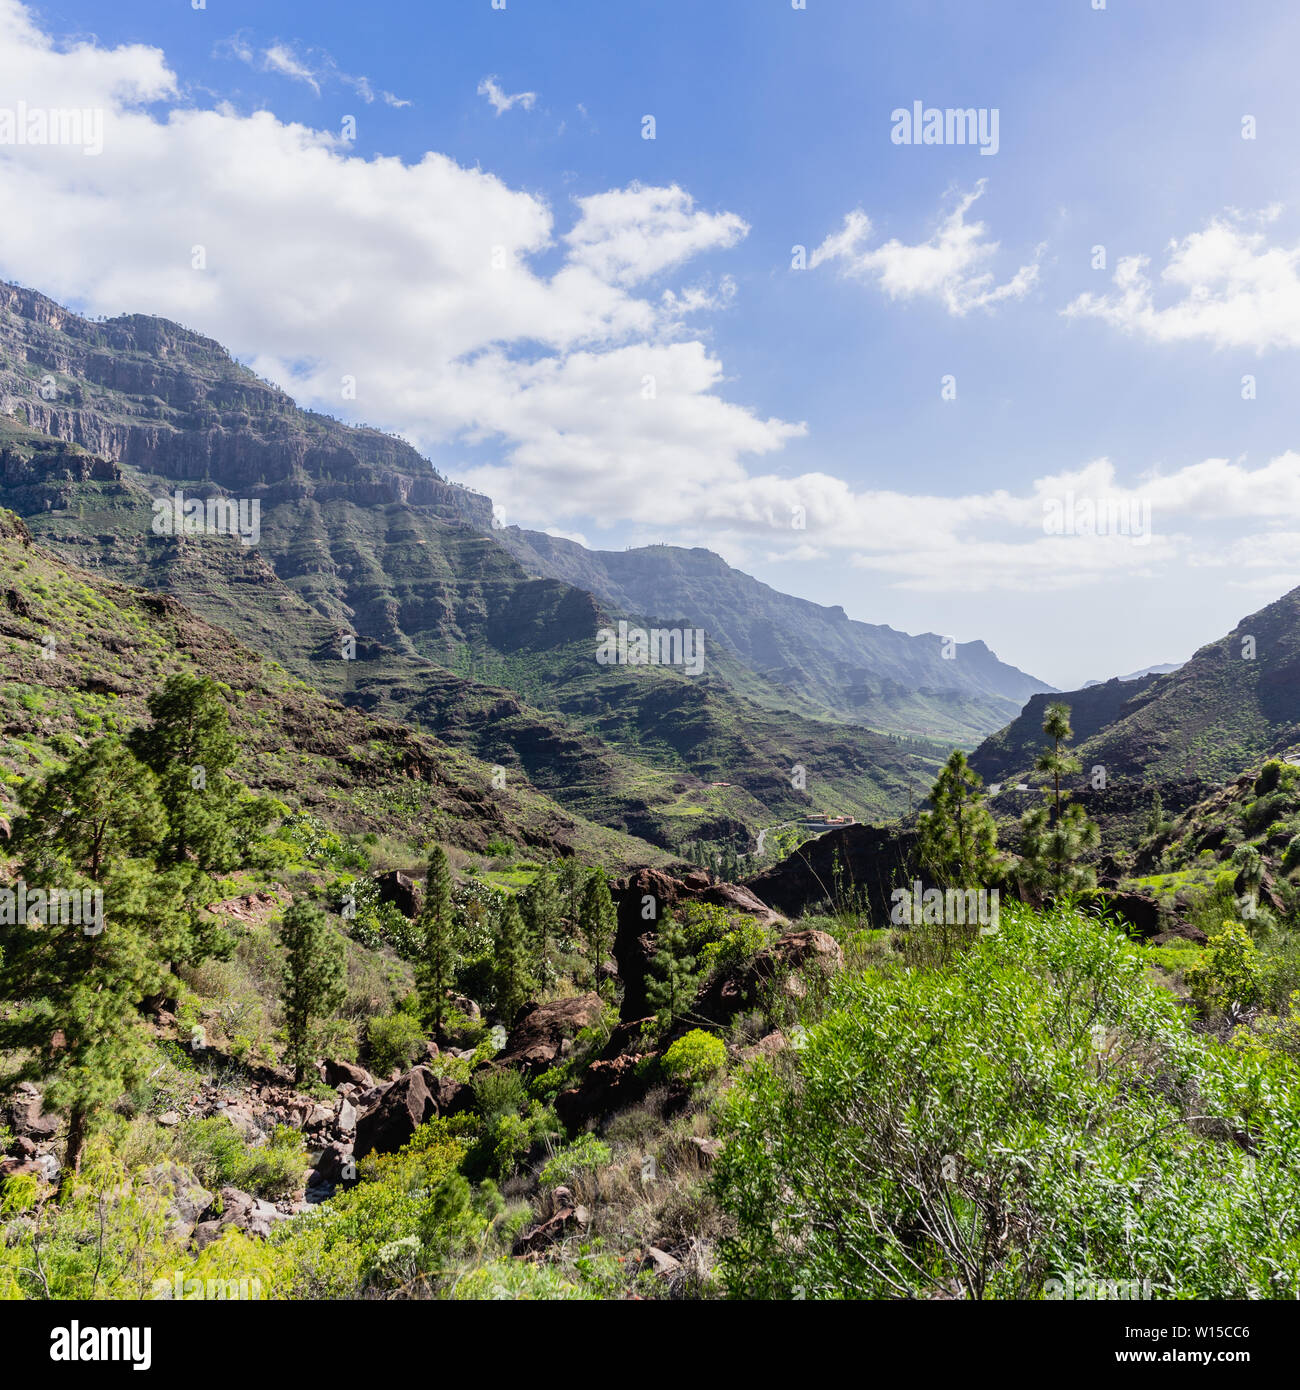 Nature and landscape the Canary Islands - Mountains Gran Canaria Photo - Alamy